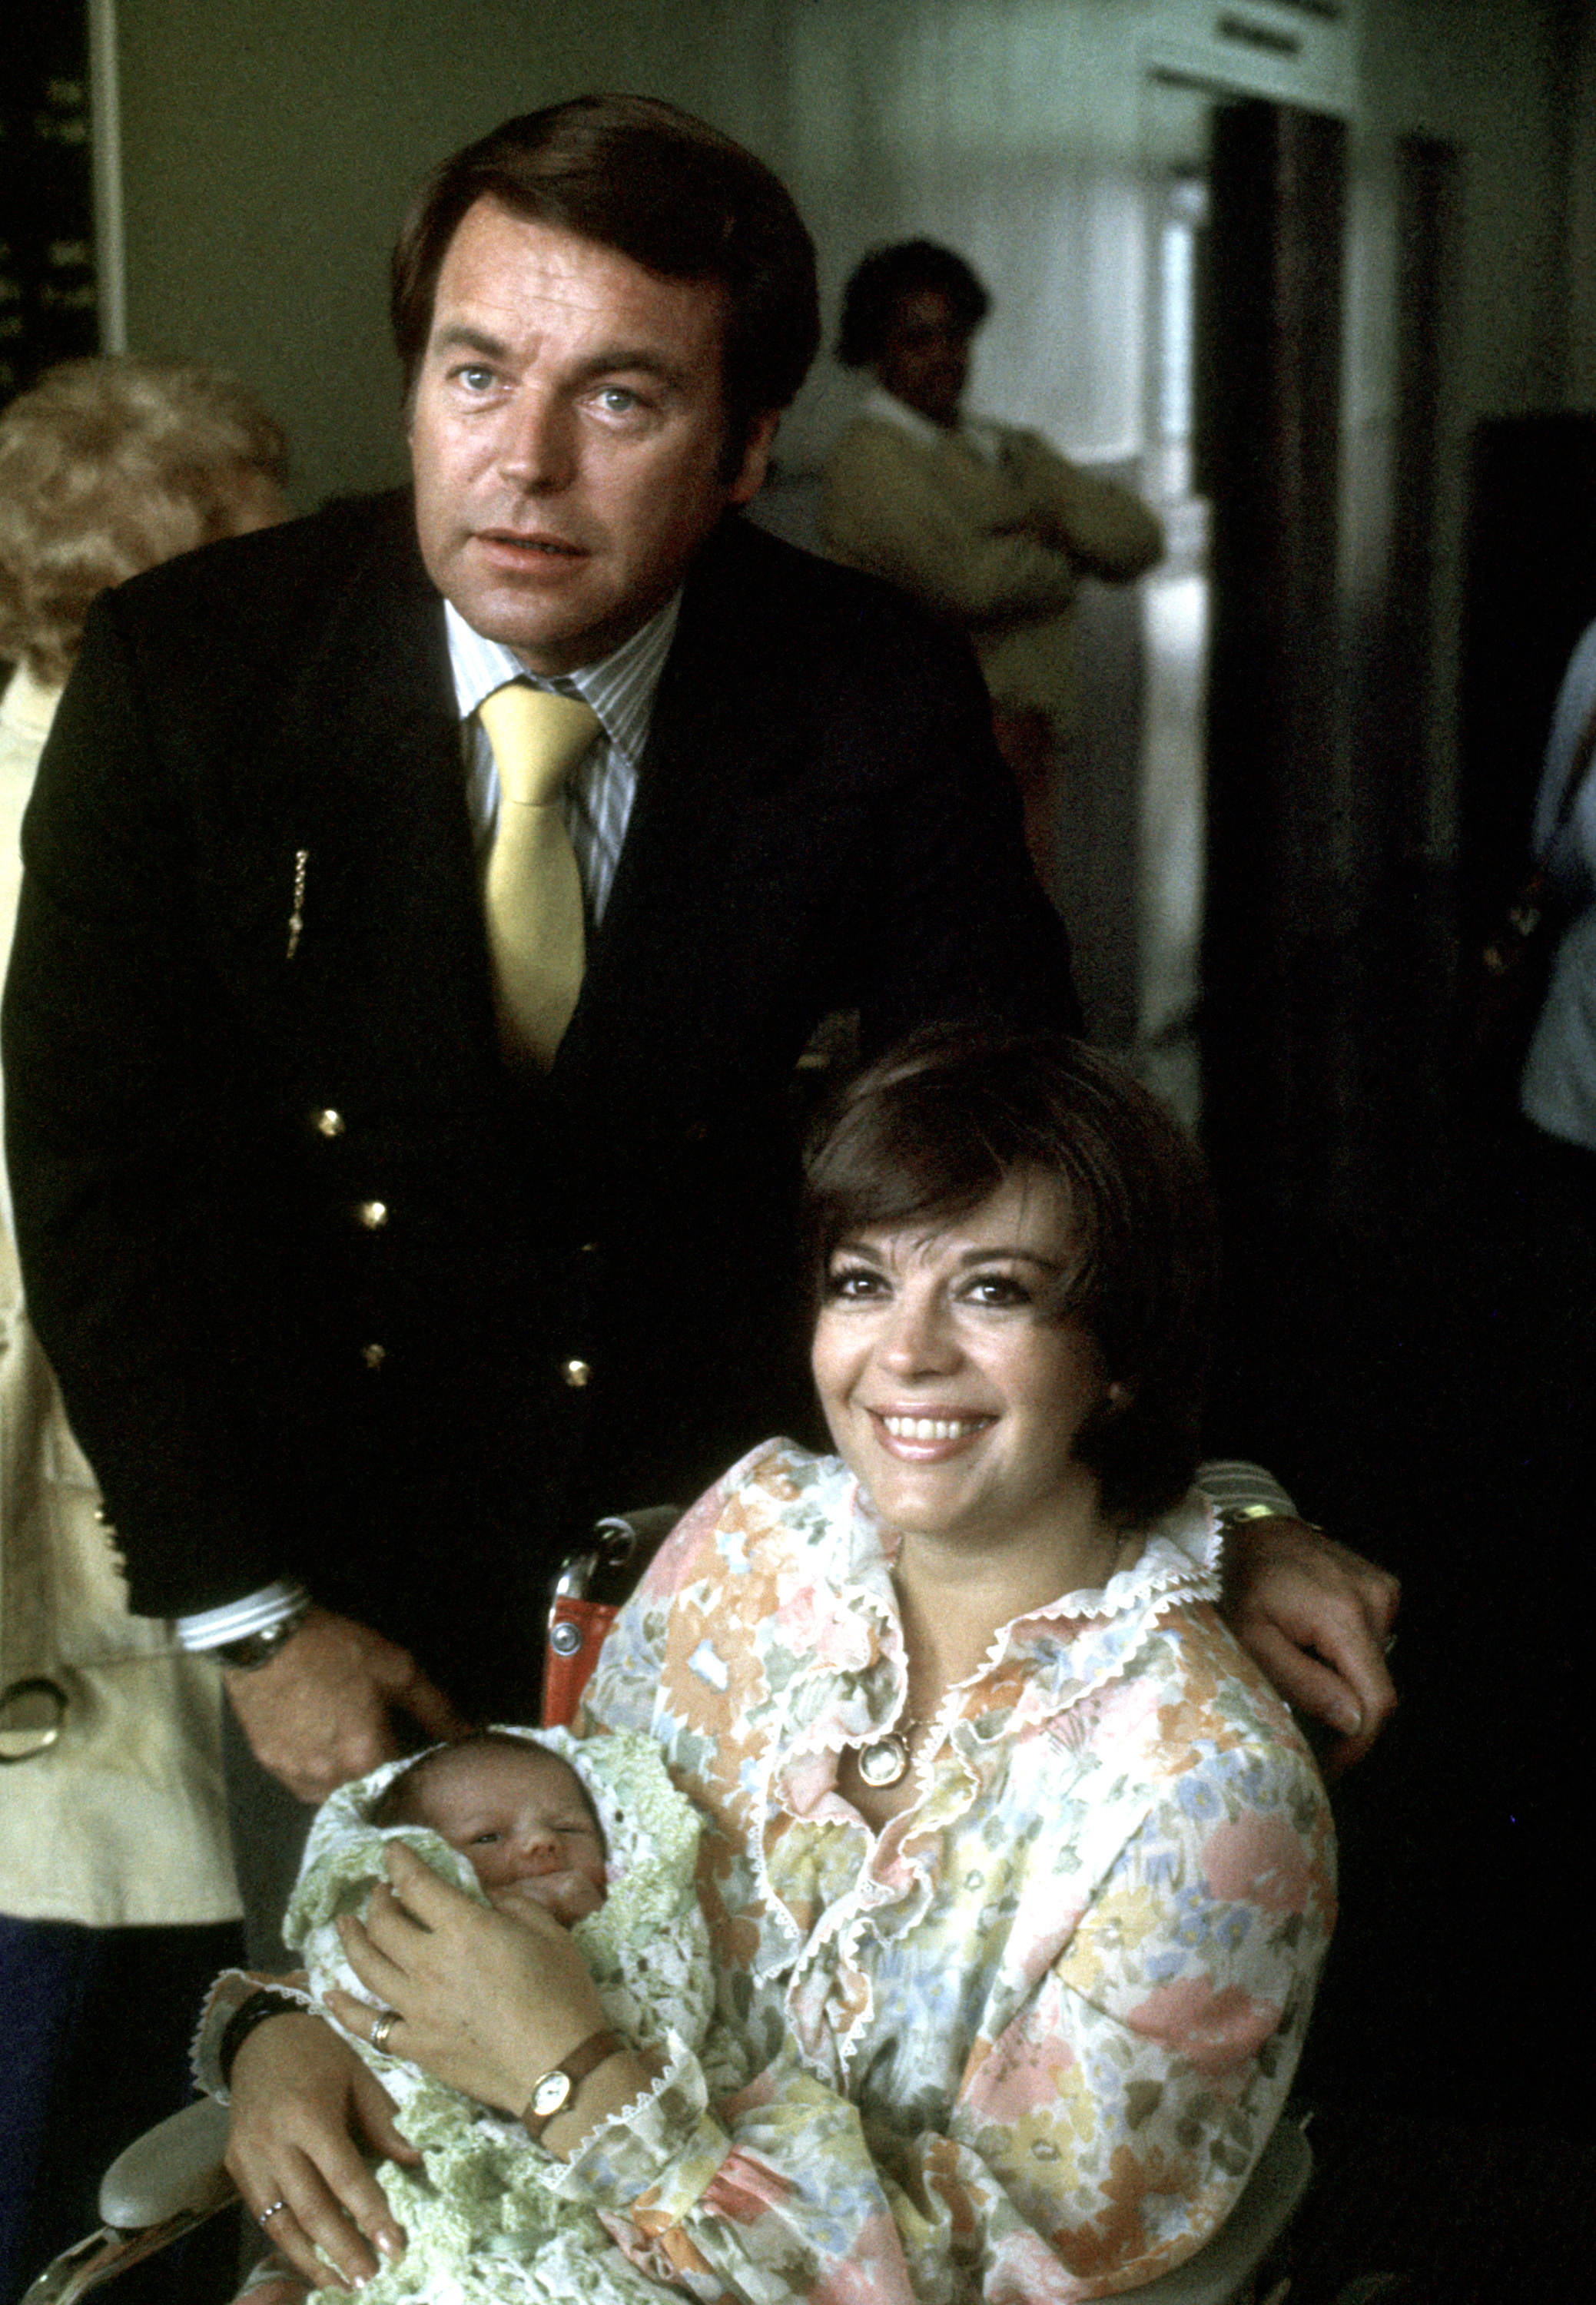 Natalie Wood and Robert Wagner after welcoming their daughter Courtney in Los Angeles in 1974 | Source: Getty Images